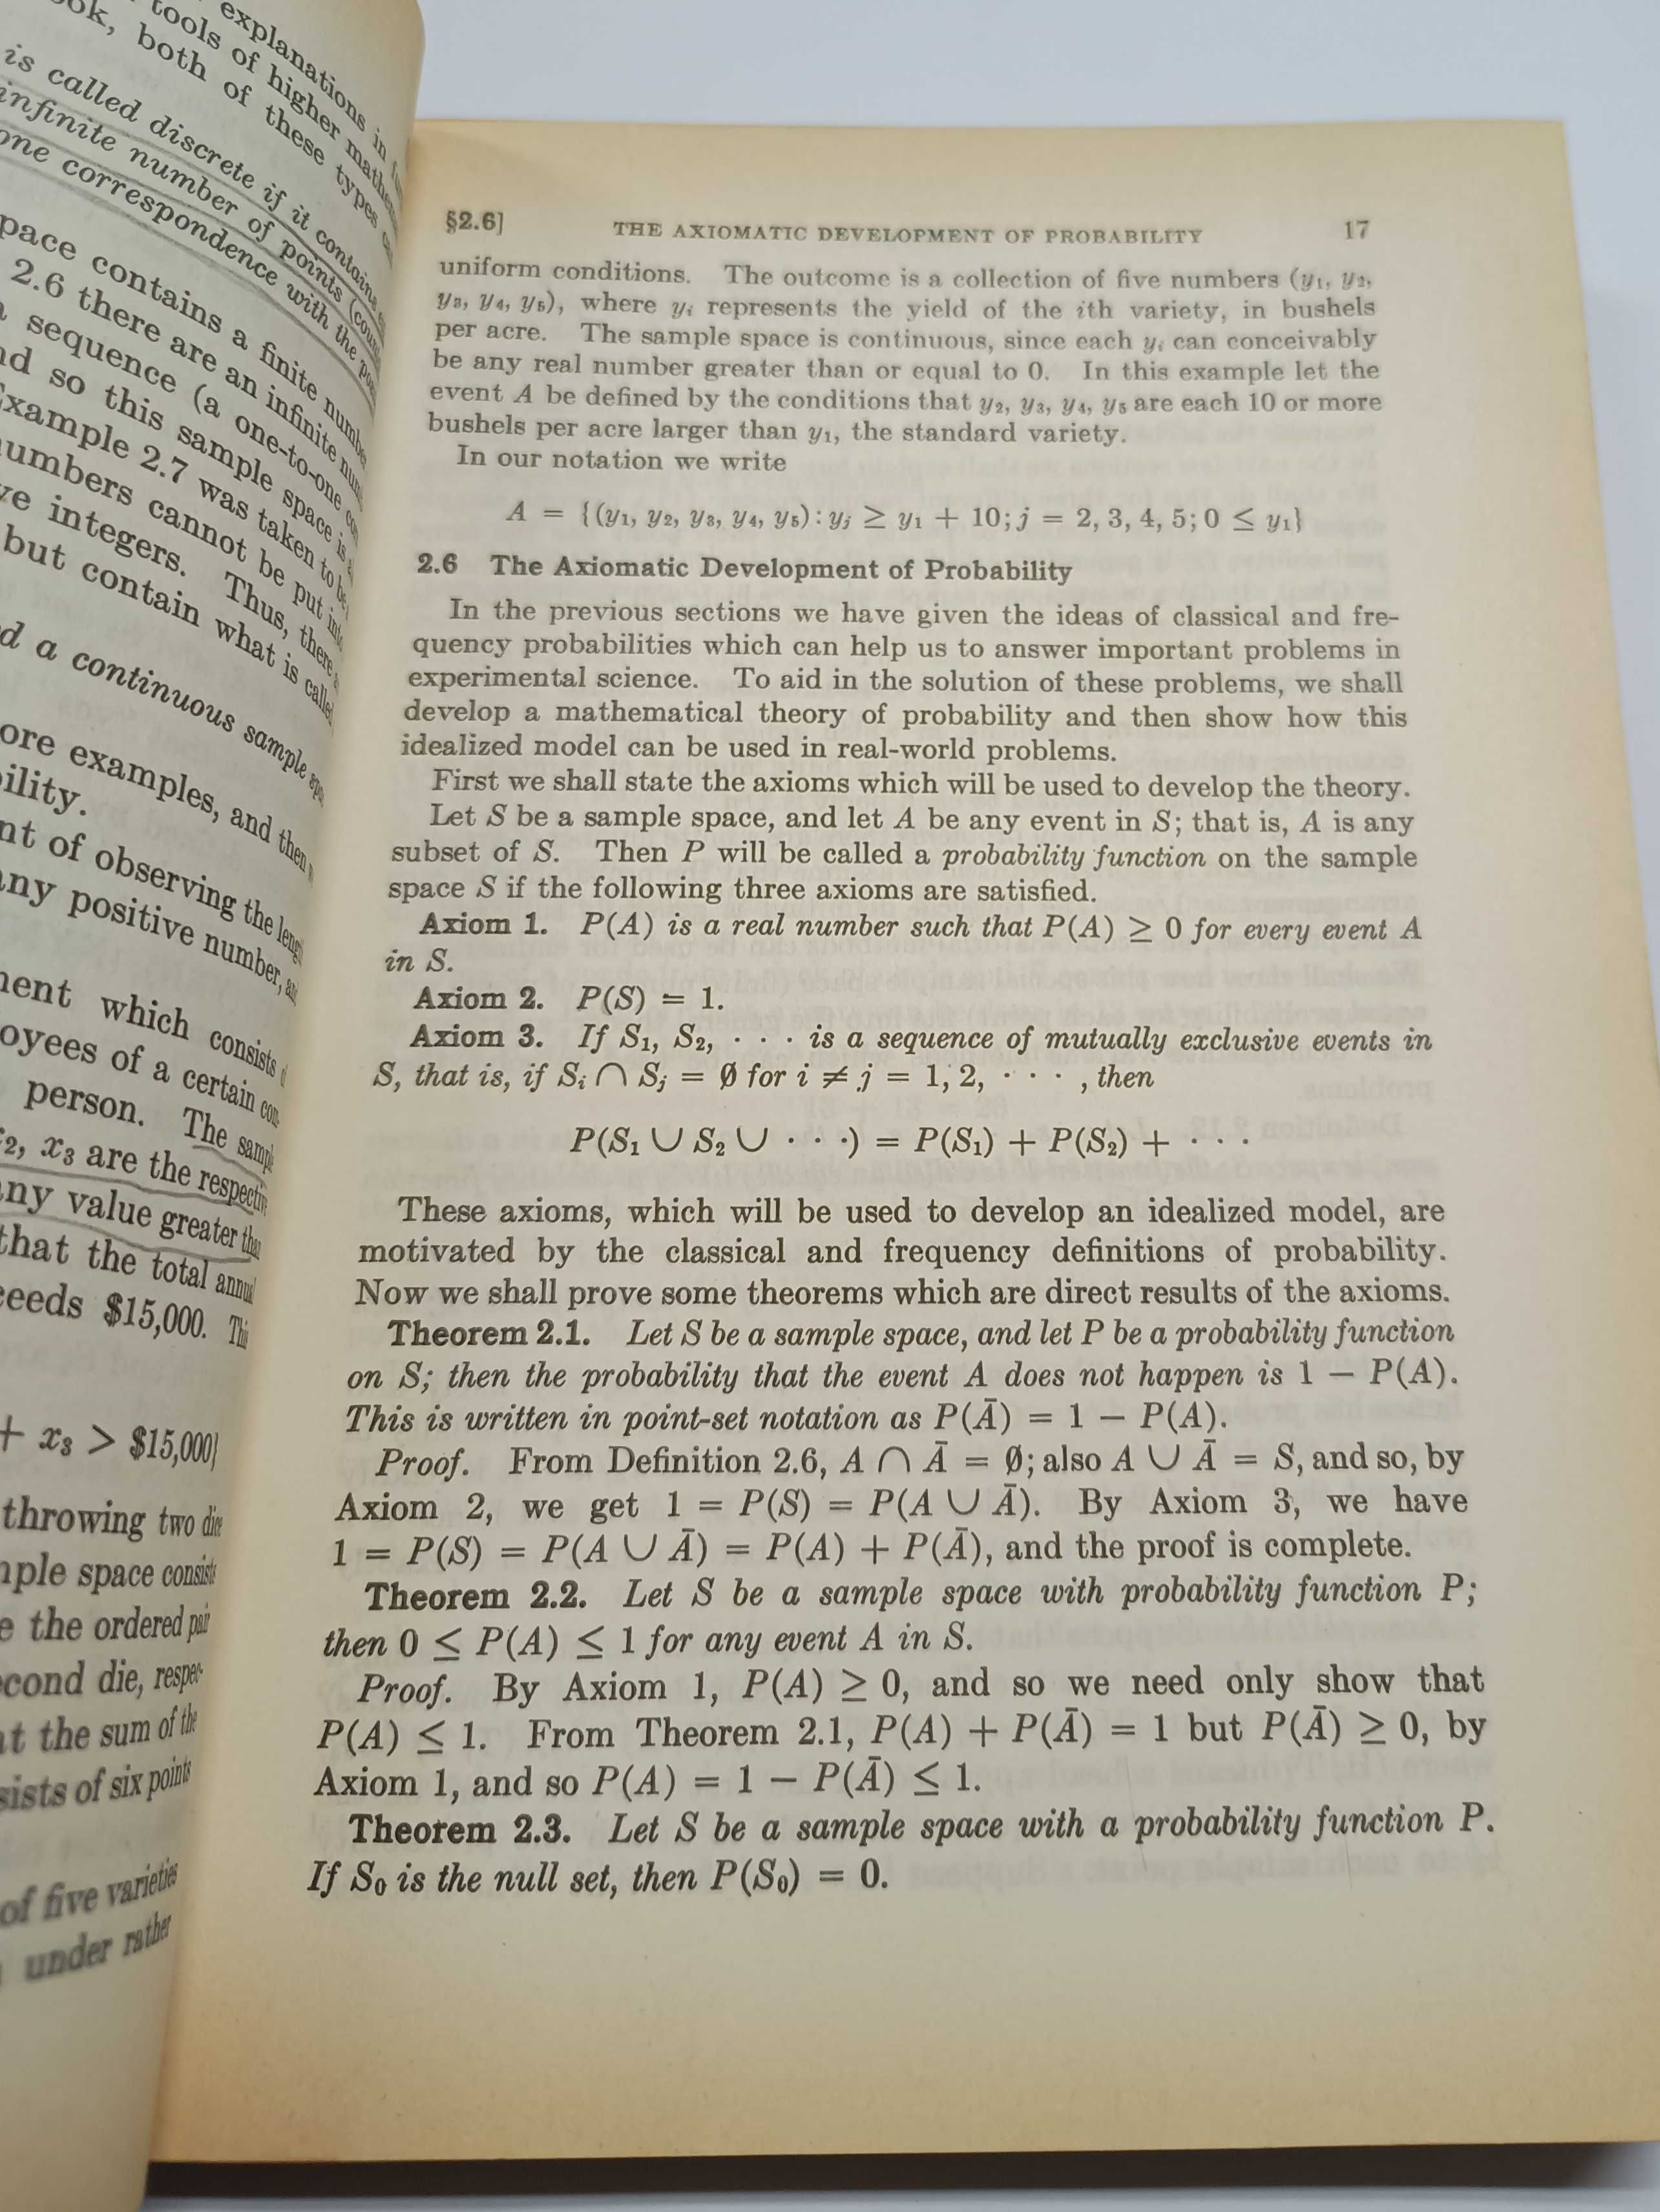 Introduction to the theory of statistics, de Mood & Graybill